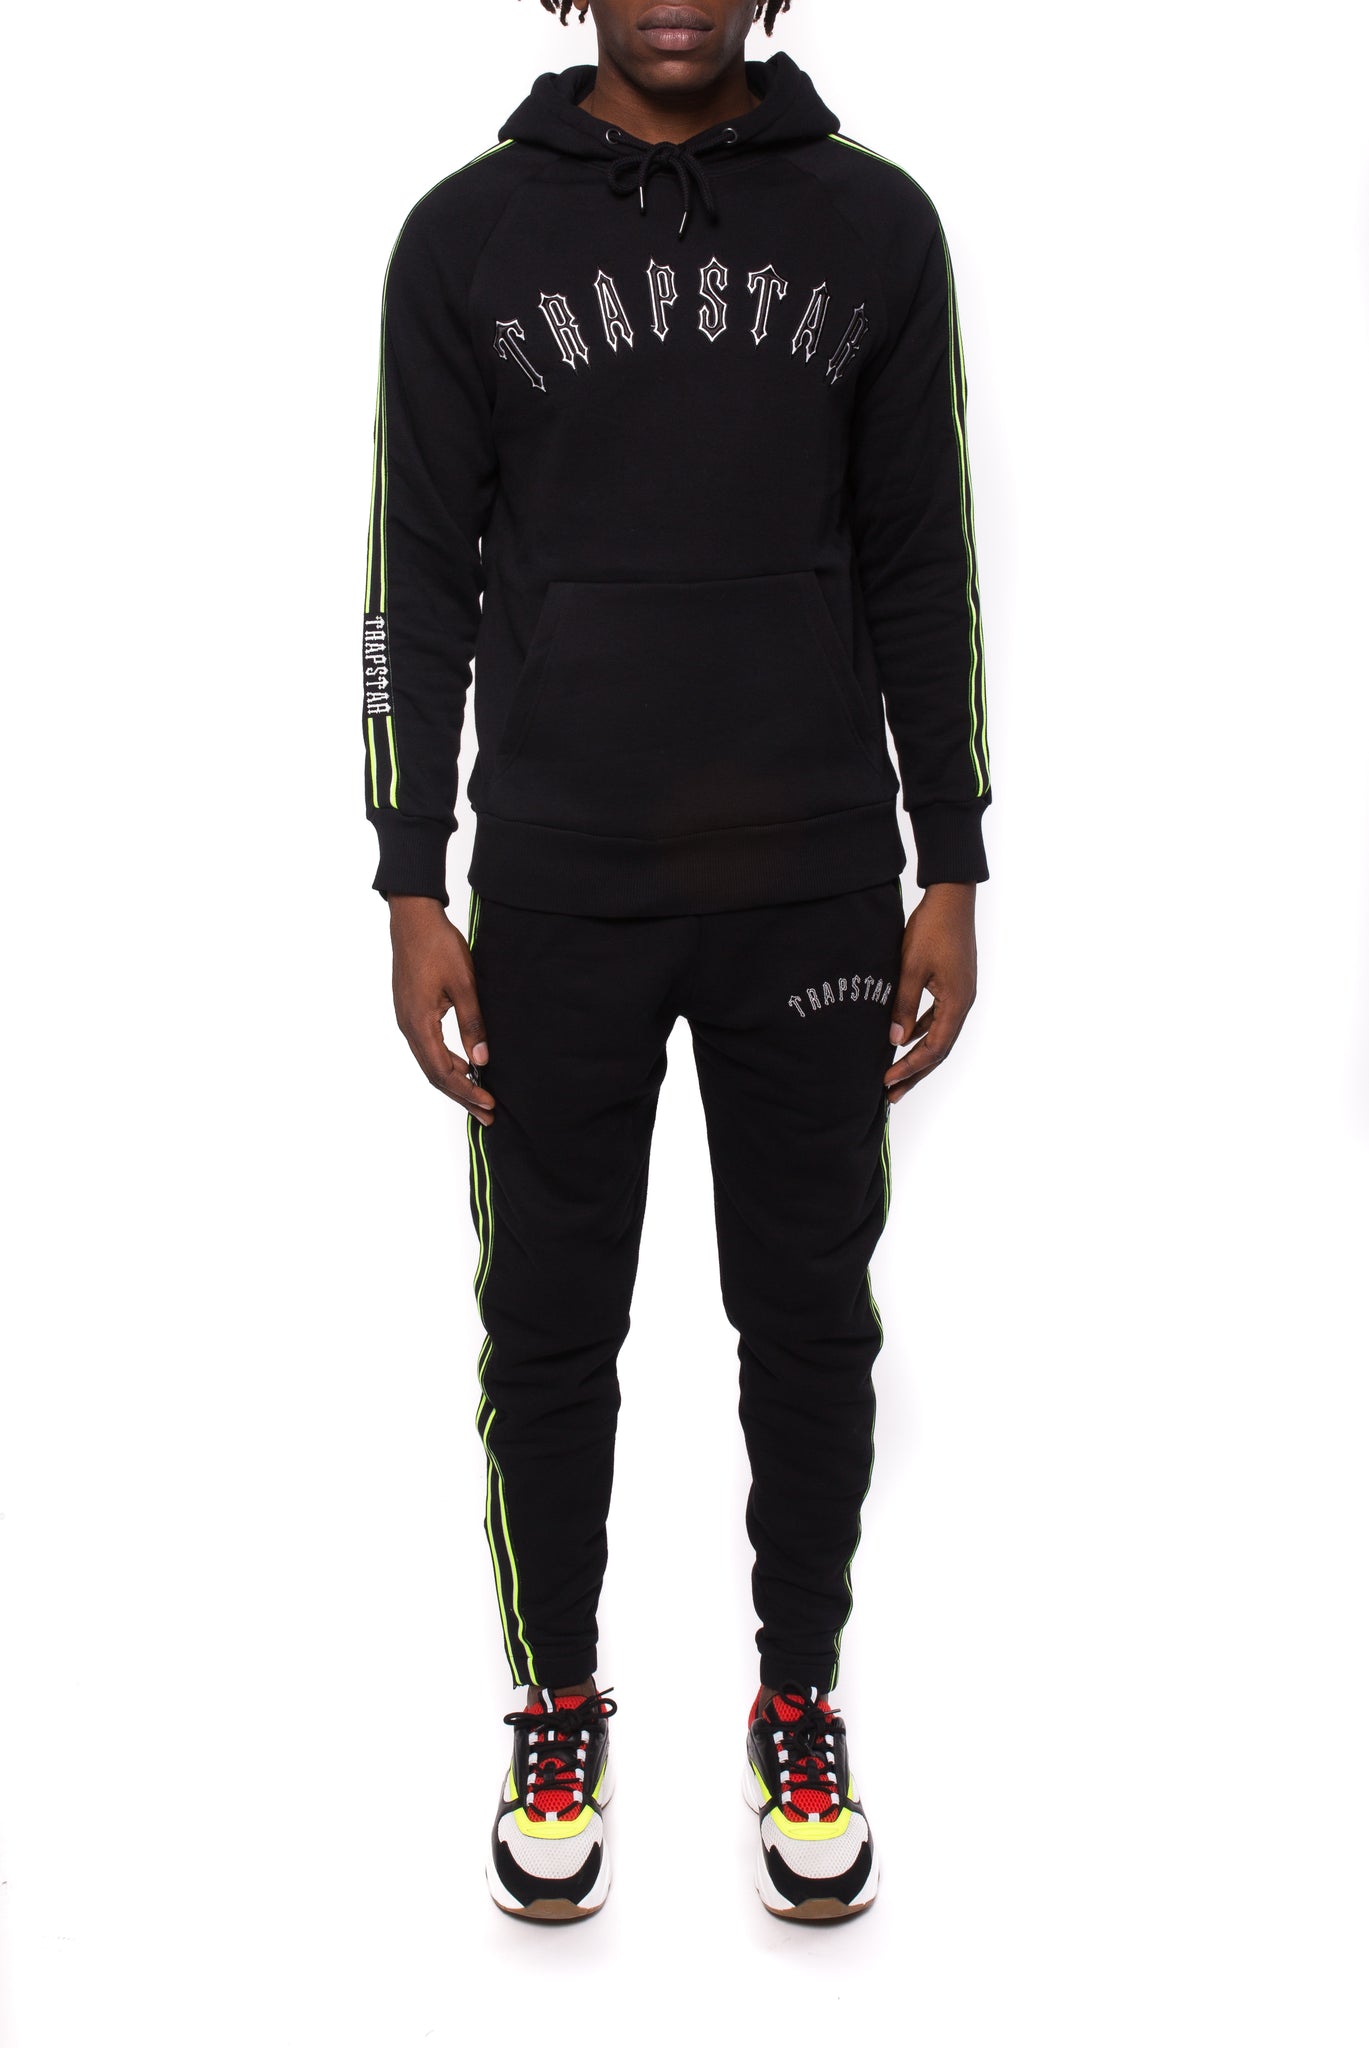 black and neon green tracksuit